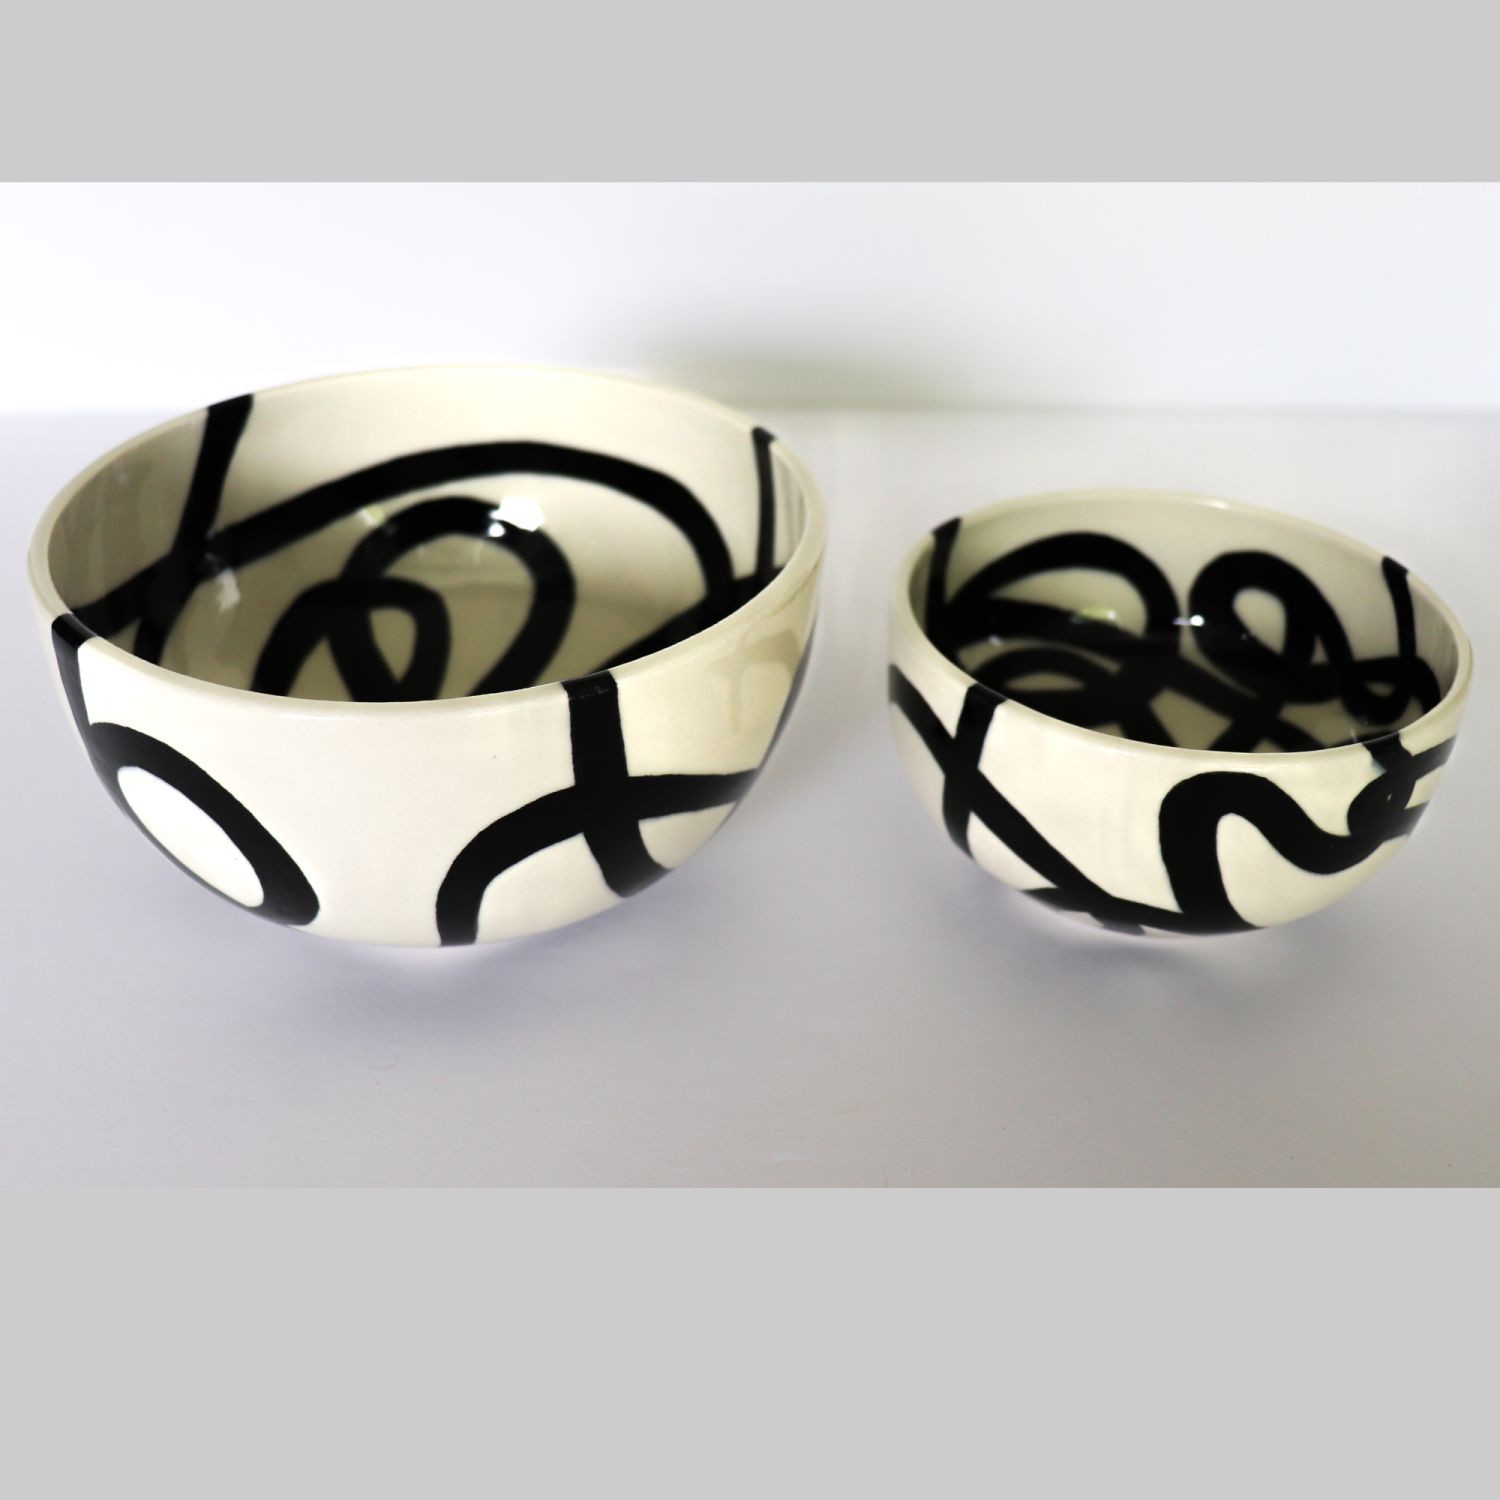 Alana Marcoccia: Interconnected Nesting Bowl – Small Product Image 3 of 9